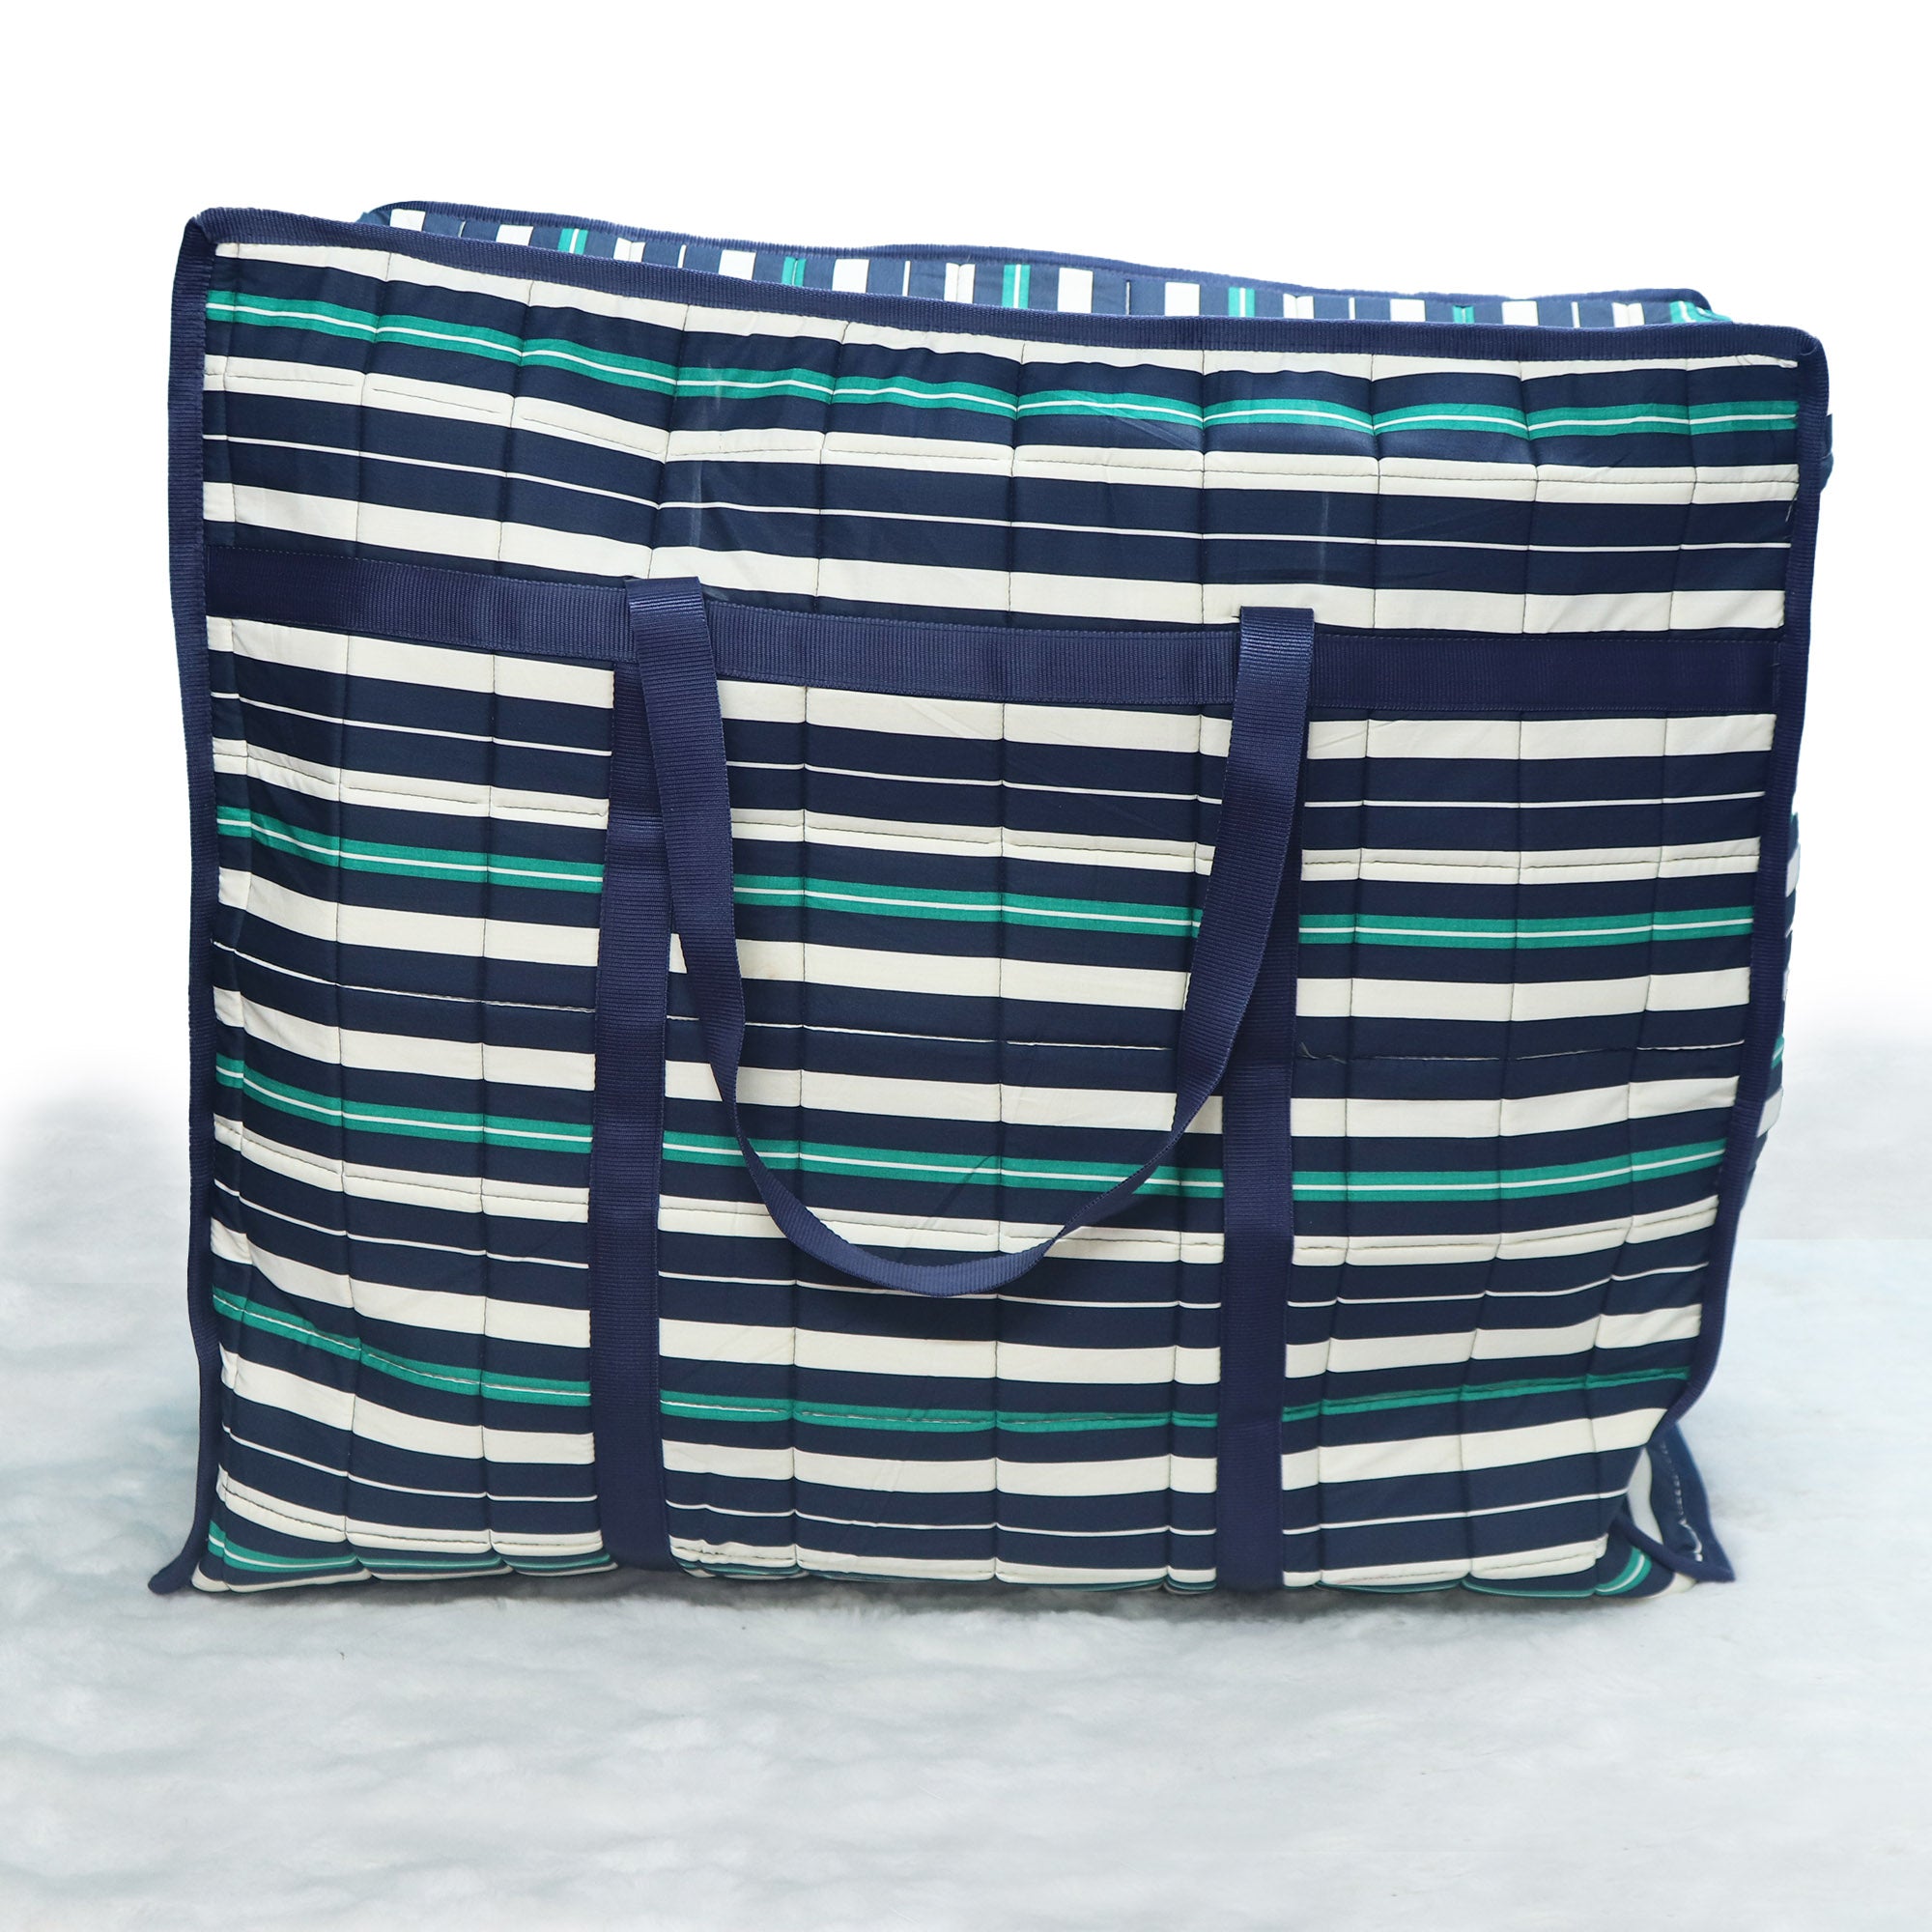 Green Blue Striped Coozly Lancom Zippered Storage Bags